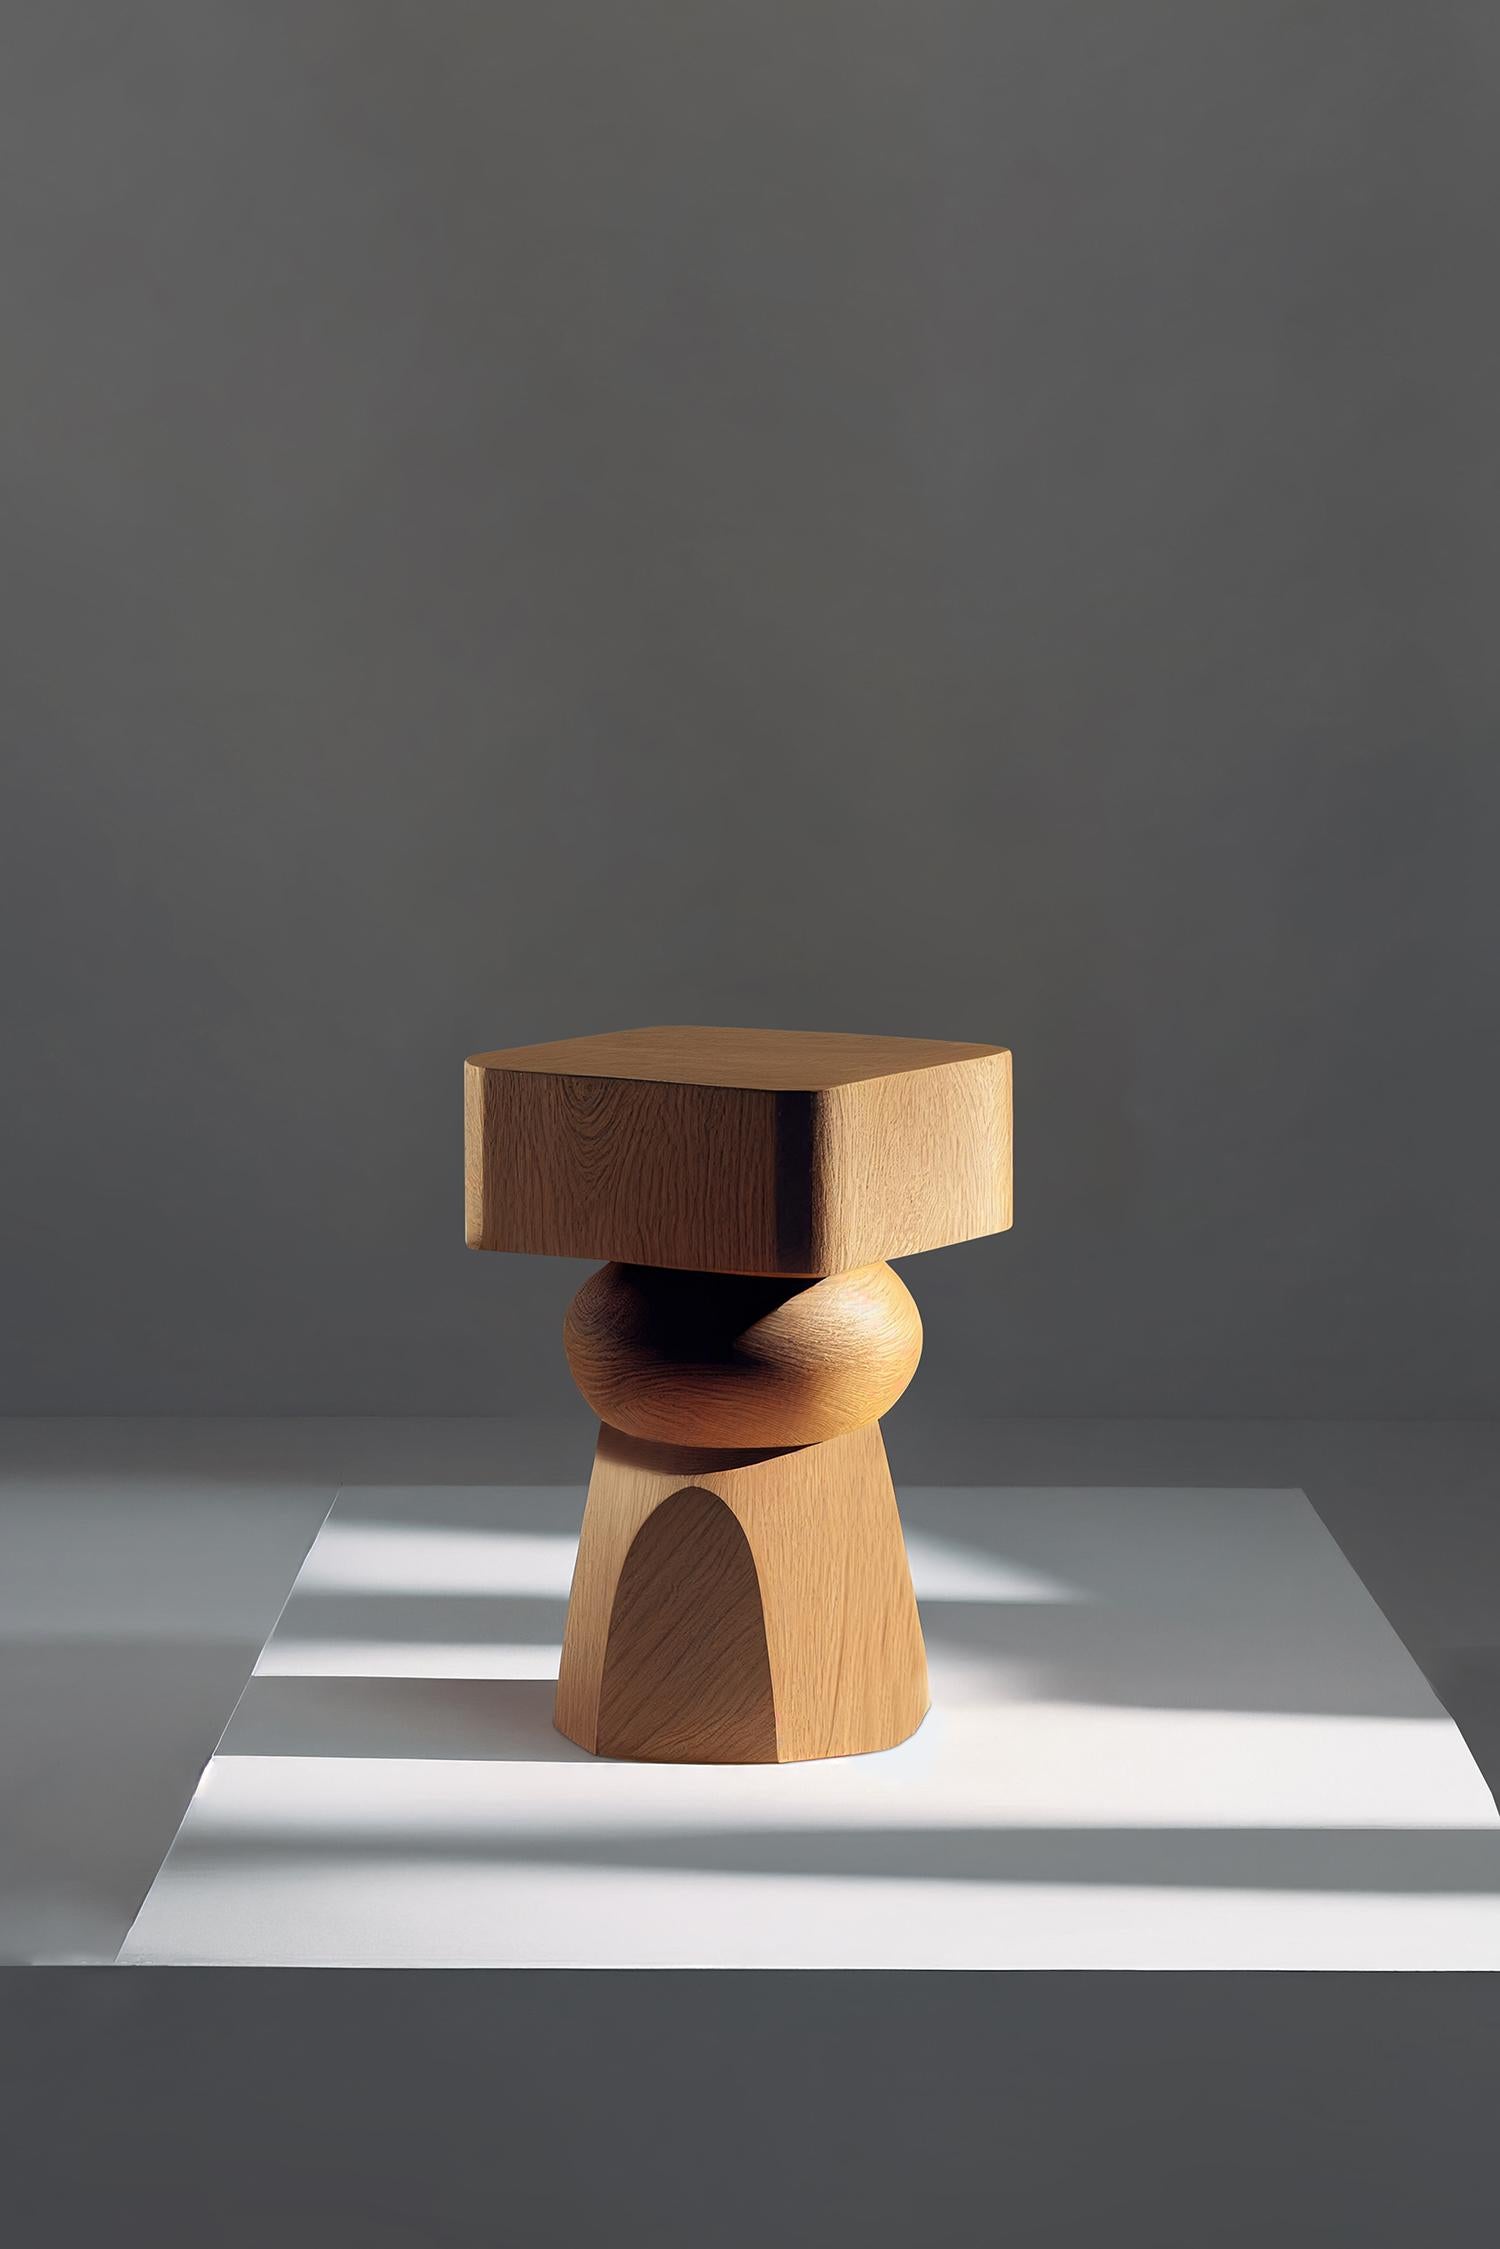 Socle 6 side table, auxiliary table, night stand

Socle is a small solid wood table designed by the NONO design team. Made of solid wood, its elaborated construction serves as a support, much like a plinth for a statue or sculpture.

In the